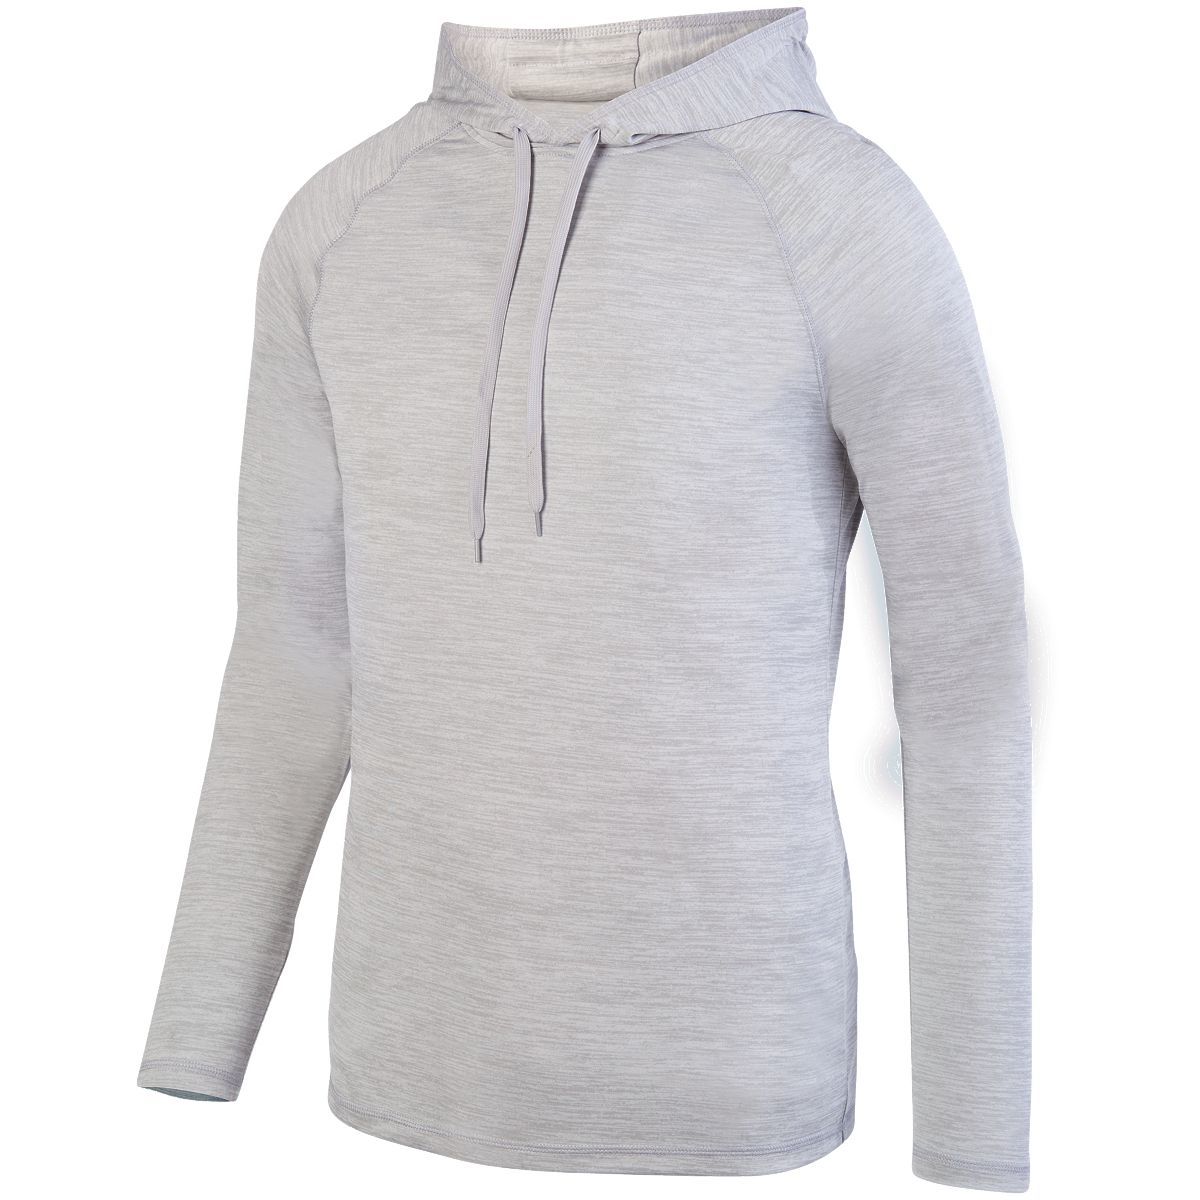 Augusta Sportswear Shadow Tonal Heather Hoodie in Silver  -Part of the Adult, Augusta-Products, Shirts, Tonal-Fleece-Collection product lines at KanaleyCreations.com